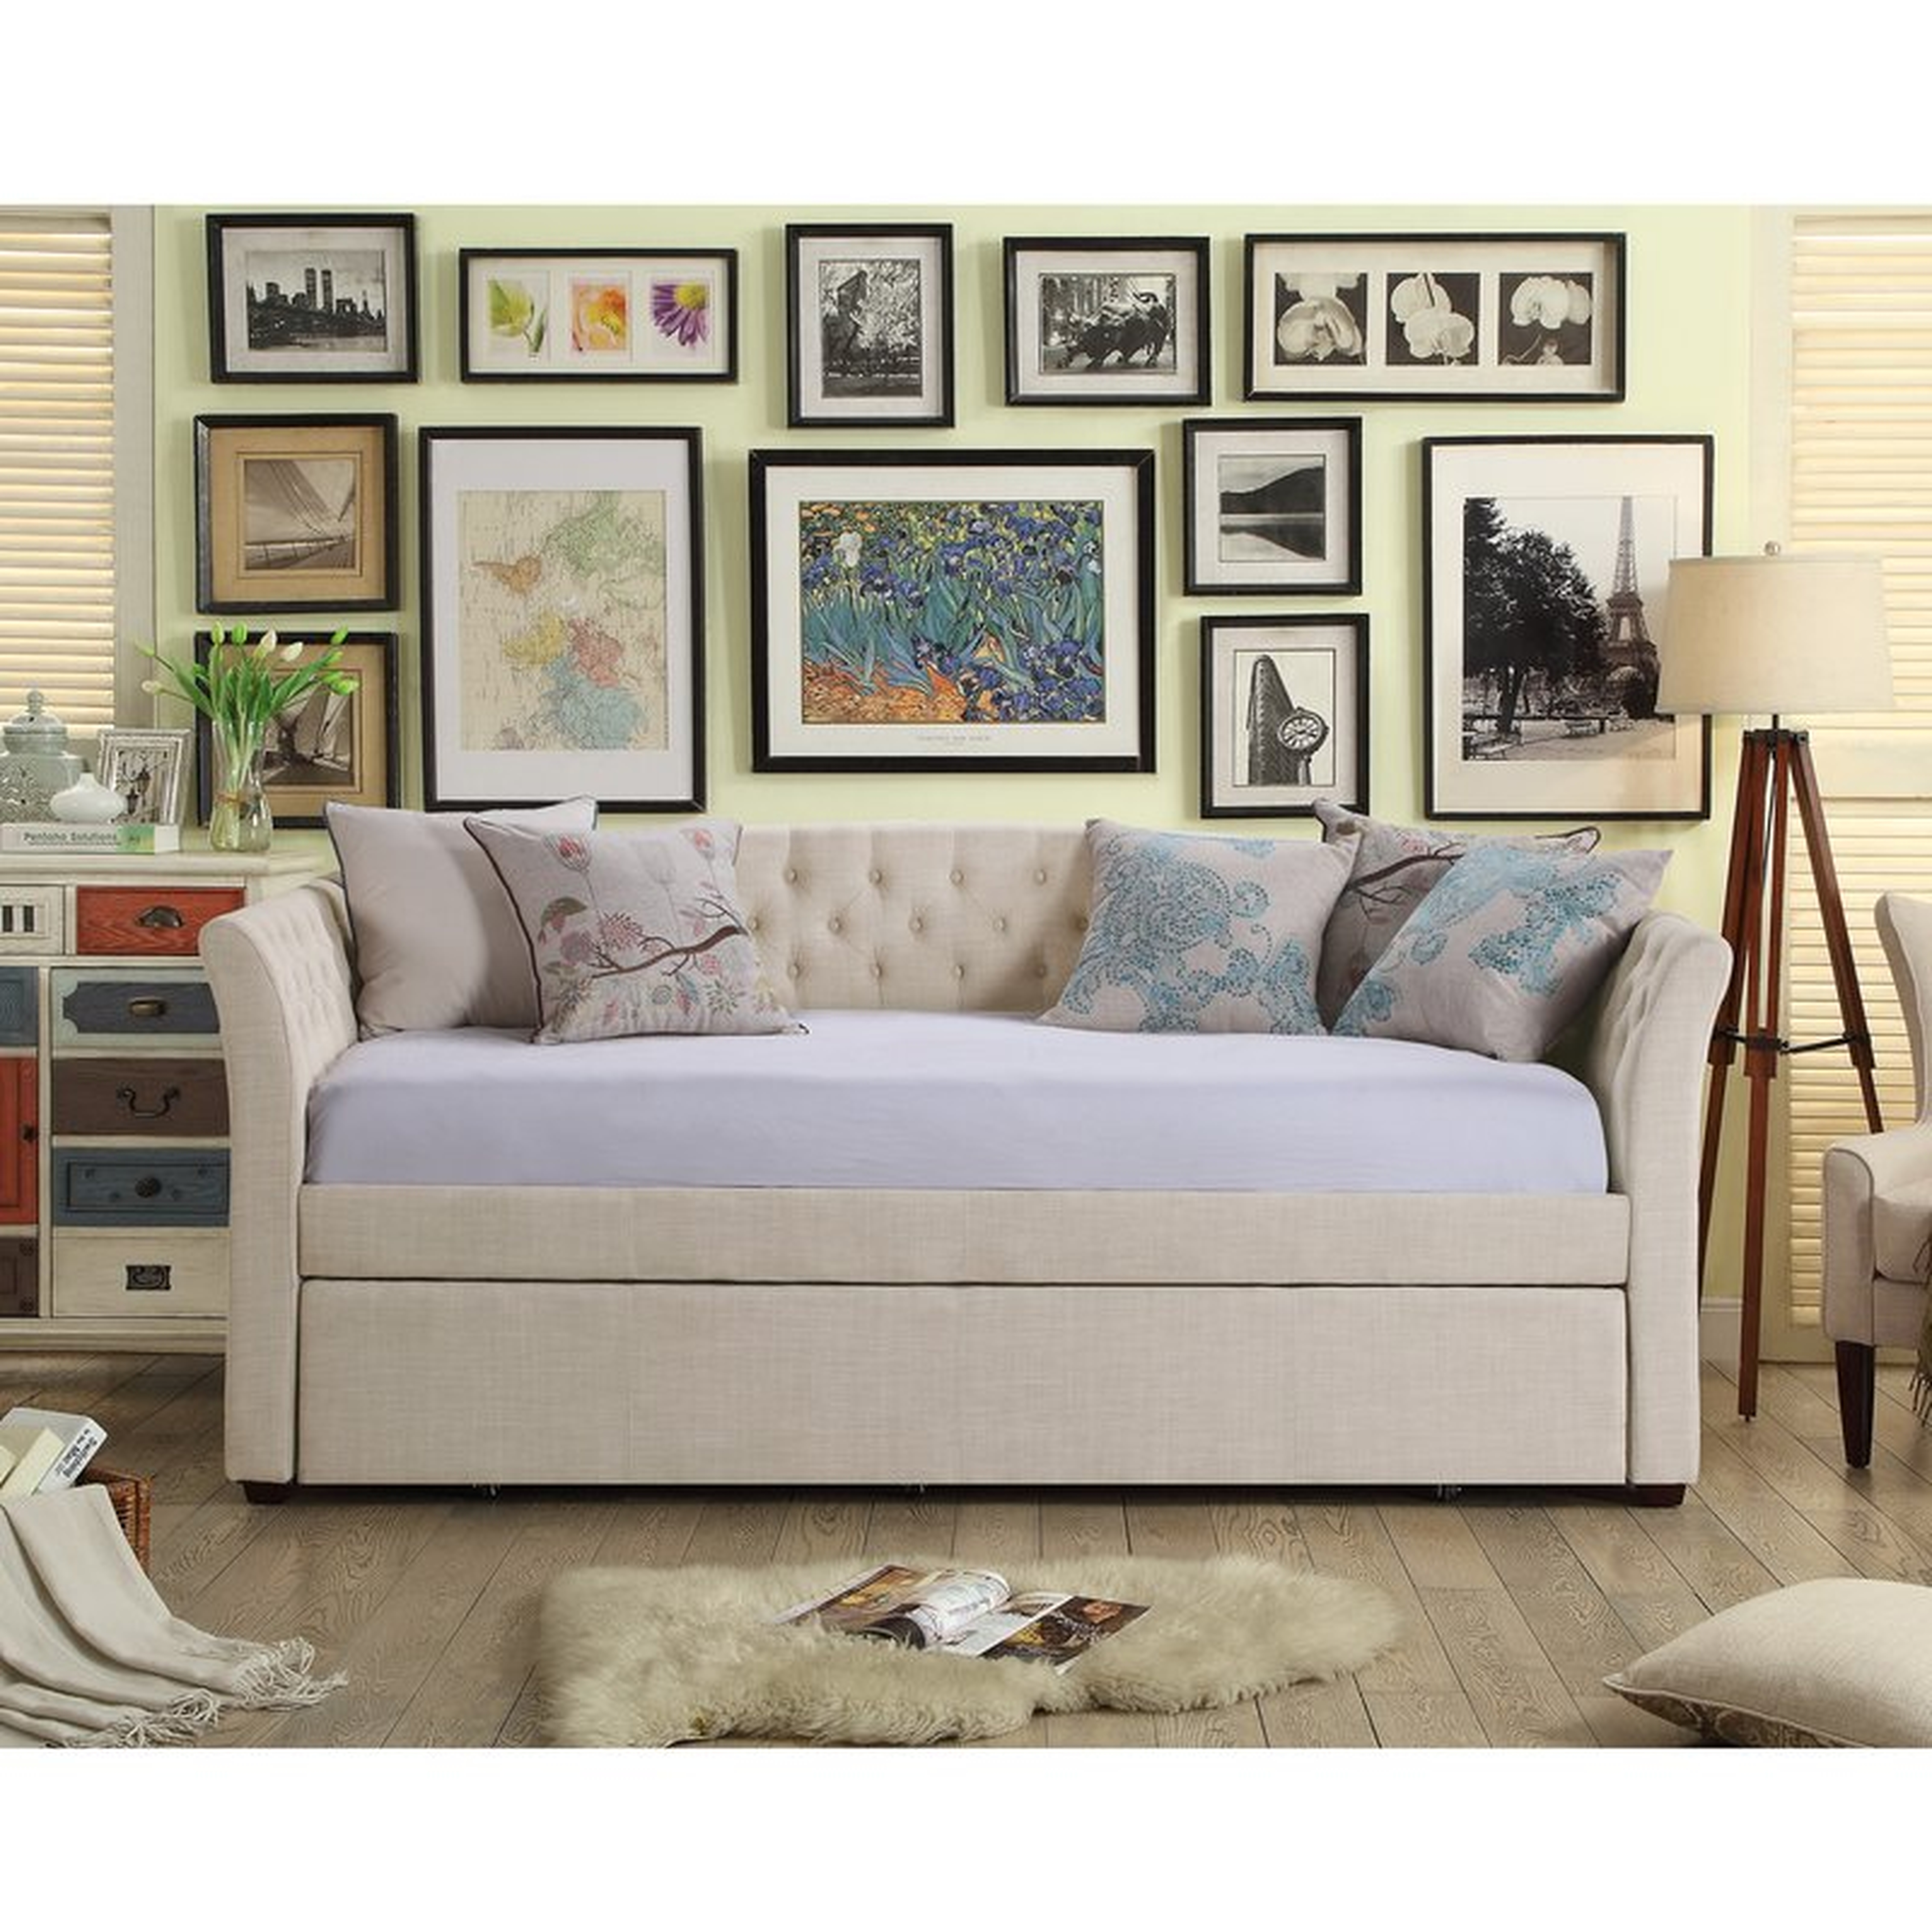 Milligan Twin Daybed With Trundle - Wayfair